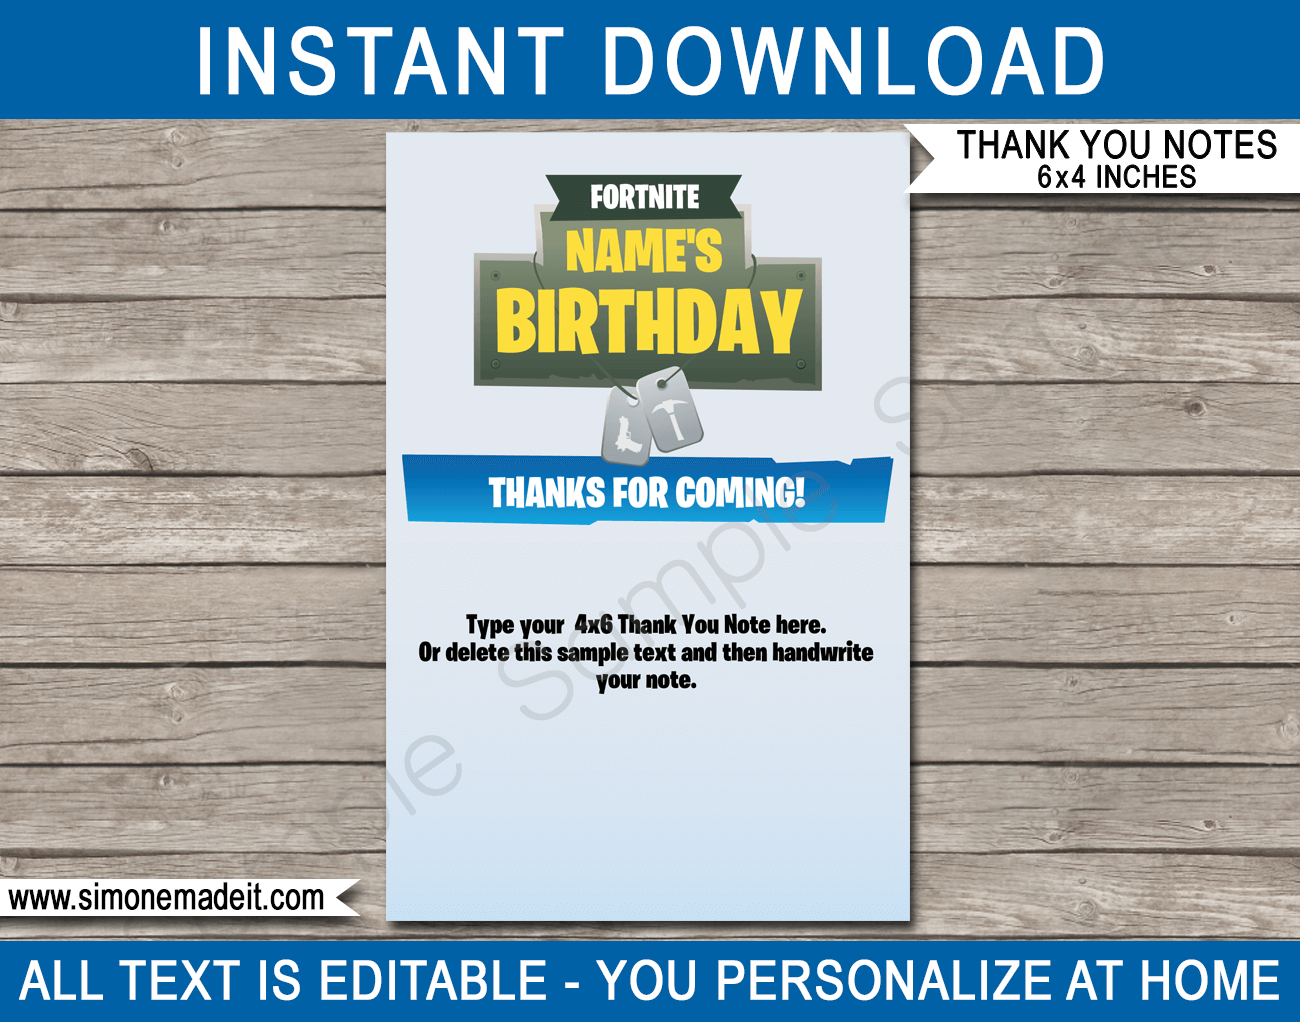 Printable Fortnite Party Thank You Cards - Favor Tags - Fortnite Birthday Party theme - Editable Template - Instant Download via simonemadeit.com